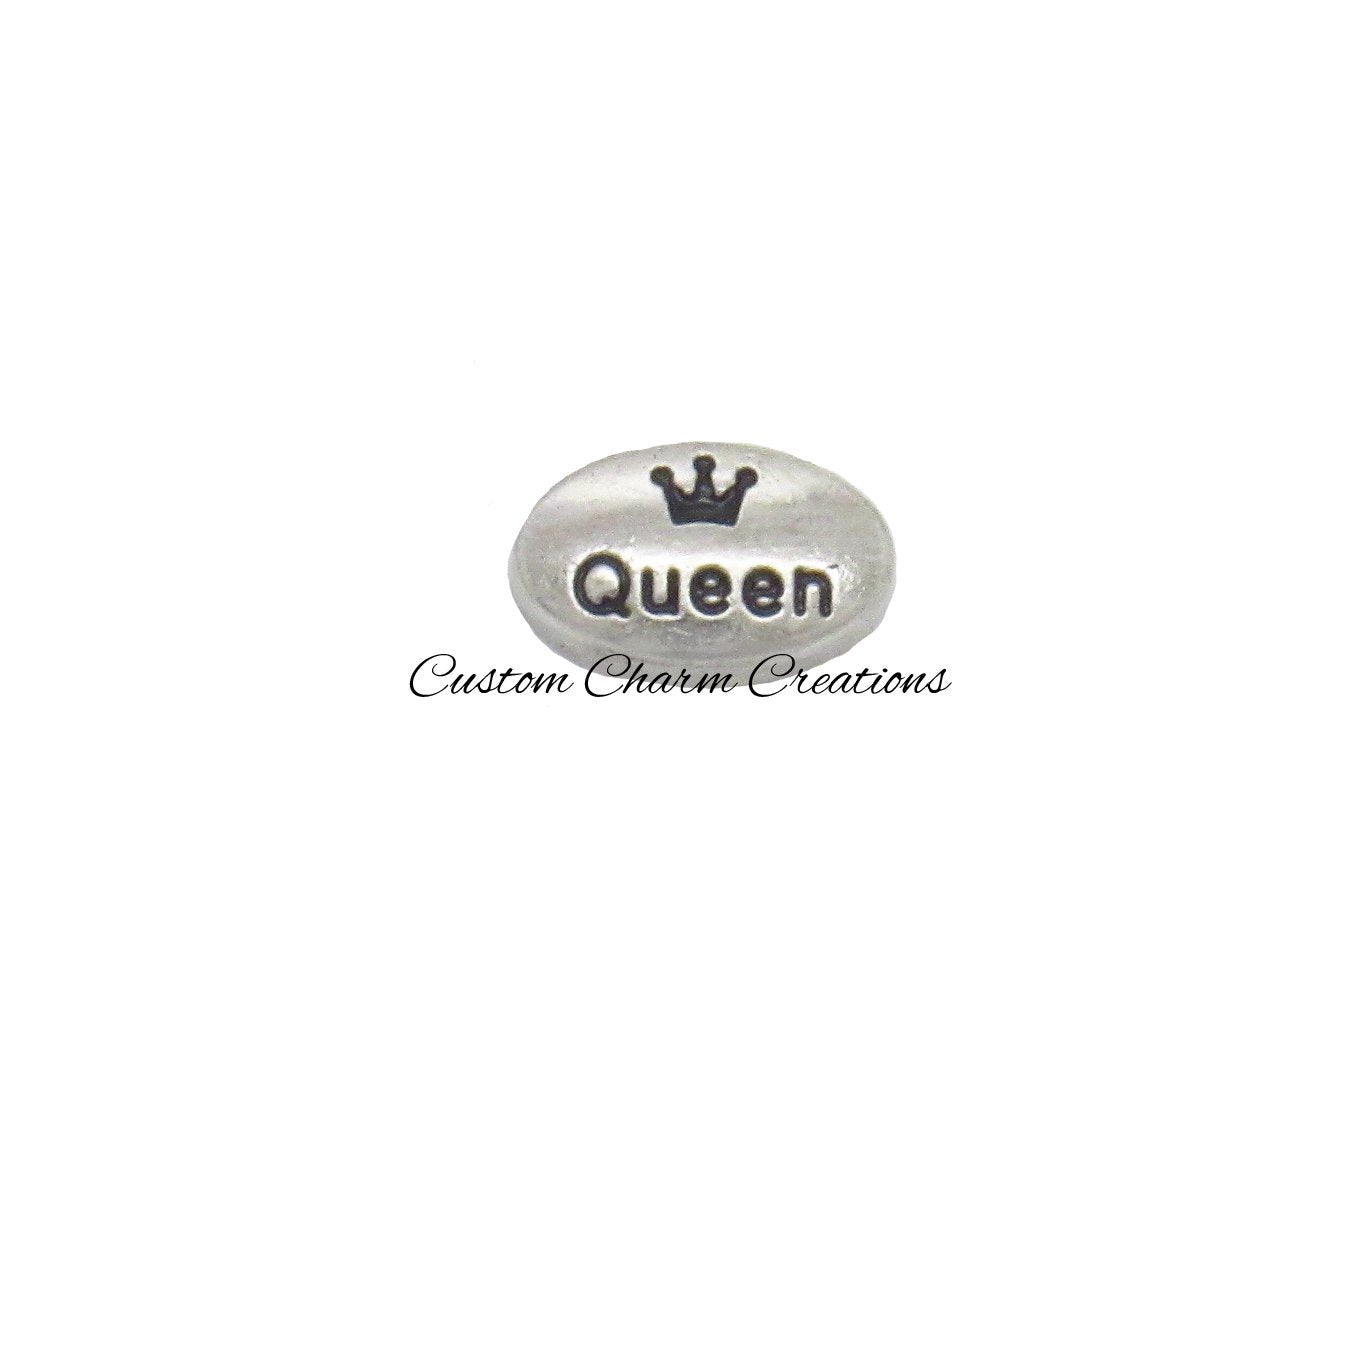 Queen Silver Oval Floating Locket Charm - Custom Charm Creations